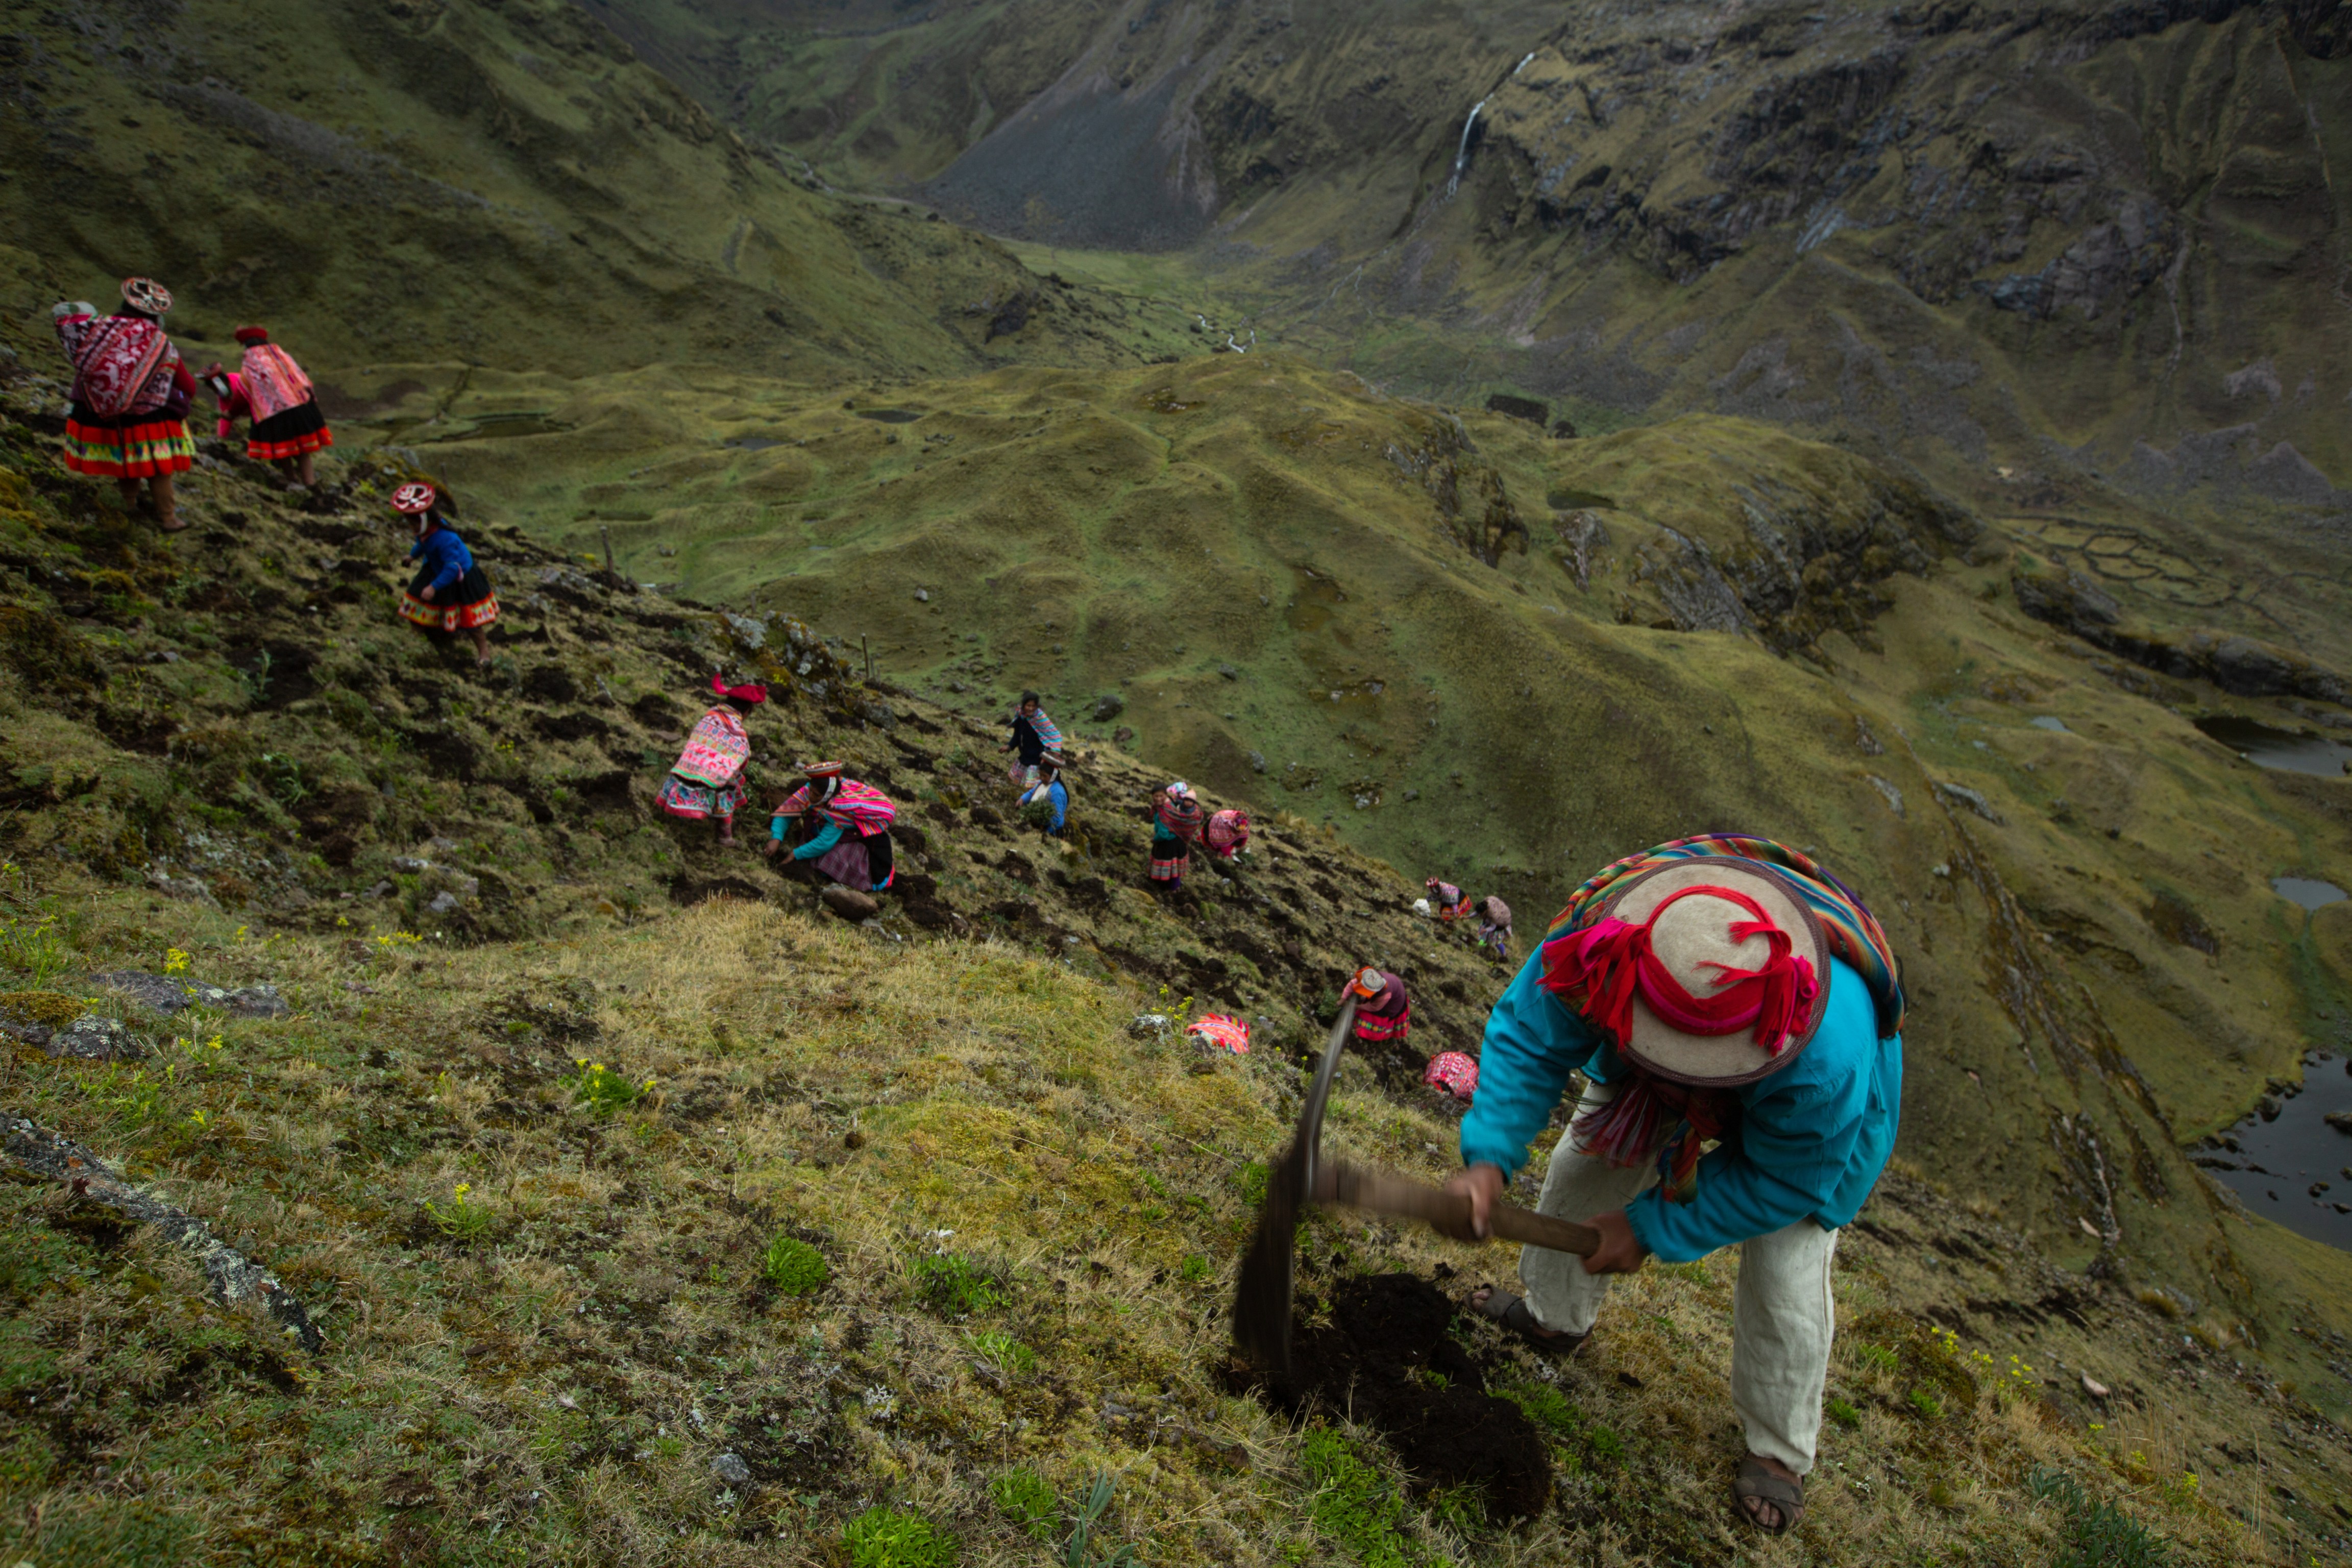 Quechua-speaking people planting trees in Andes Peru